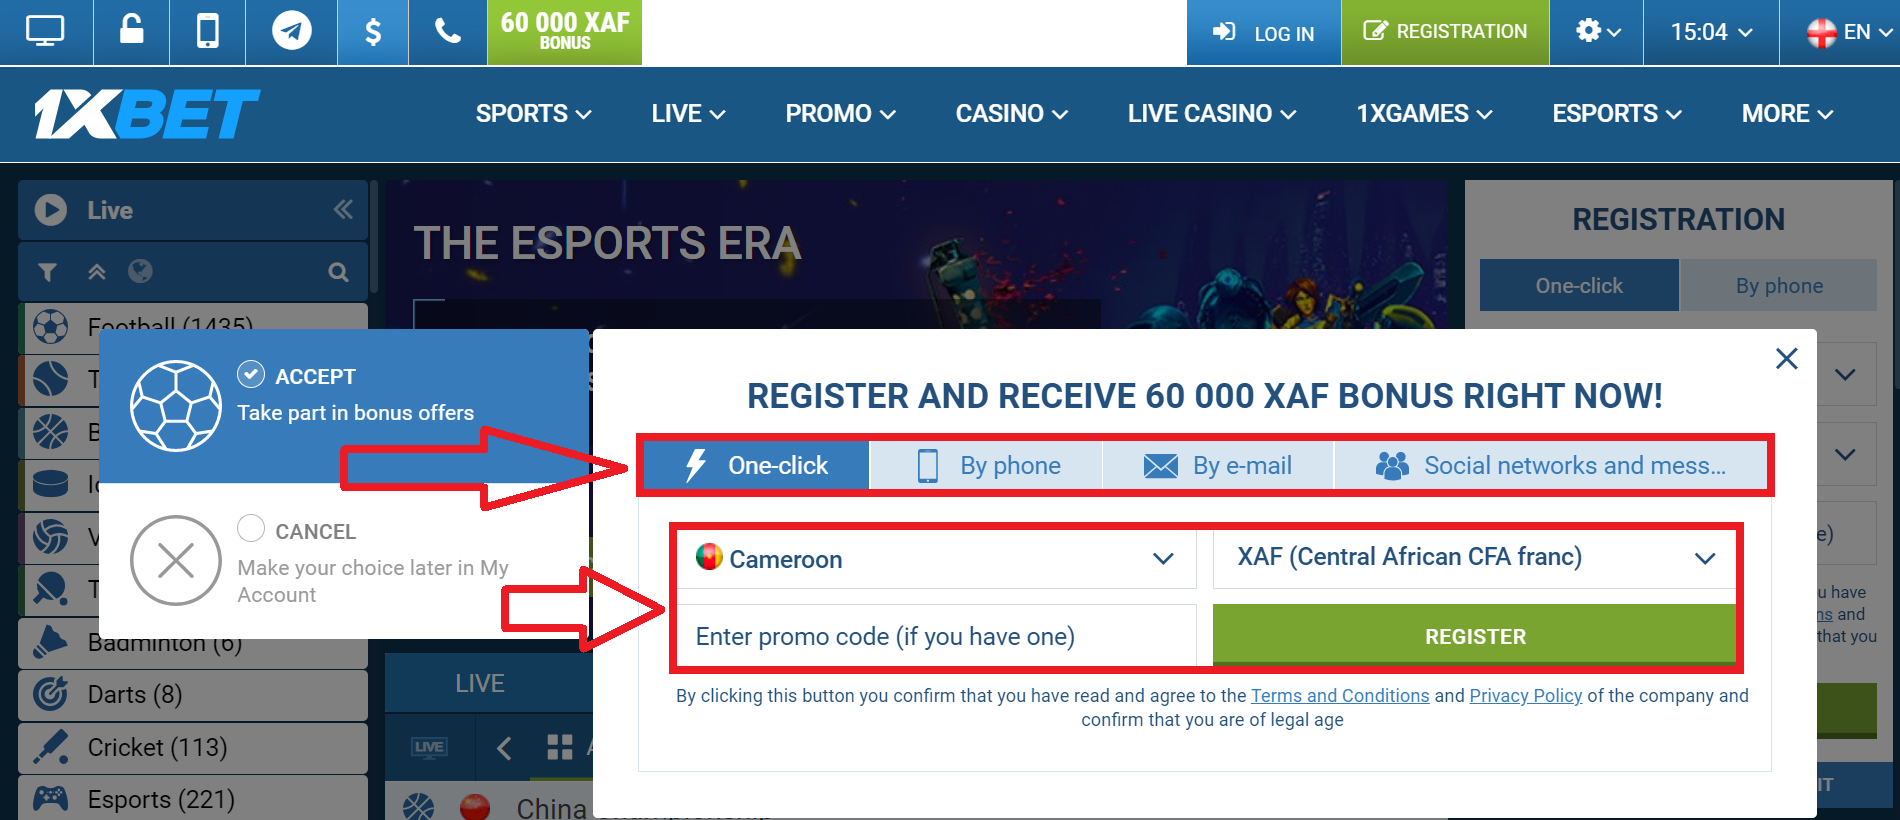 How to log in to my account 1xBet